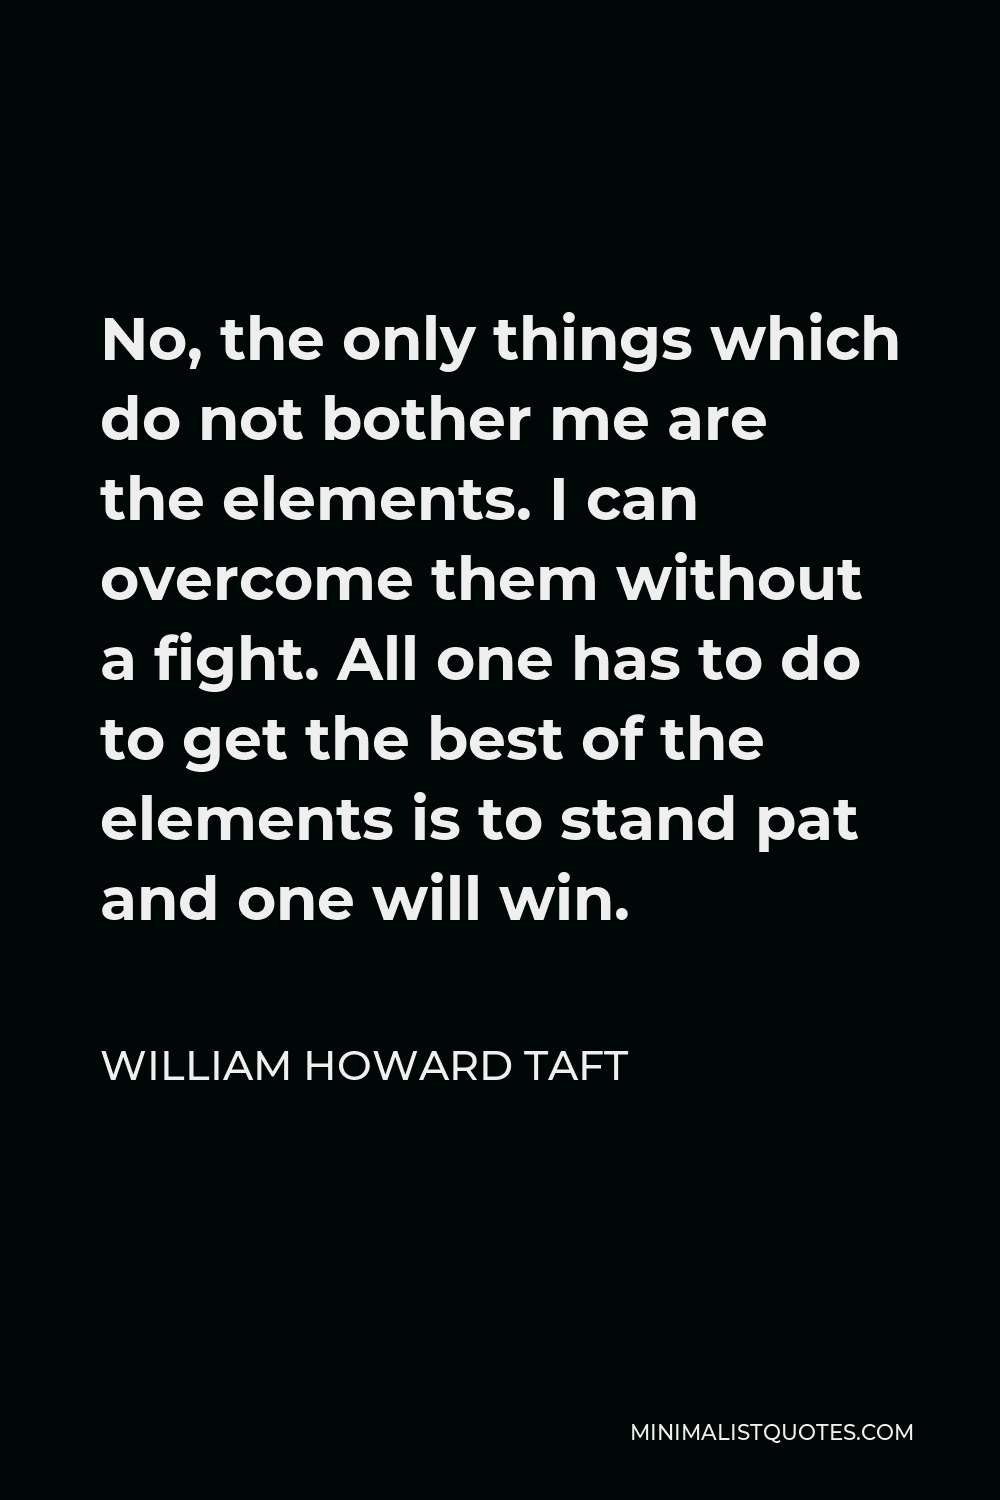 William Howard Taft Quote - No, the only things which do not bother me are the elements. I can overcome them without a fight. All one has to do to get the best of the elements is to stand pat and one will win.